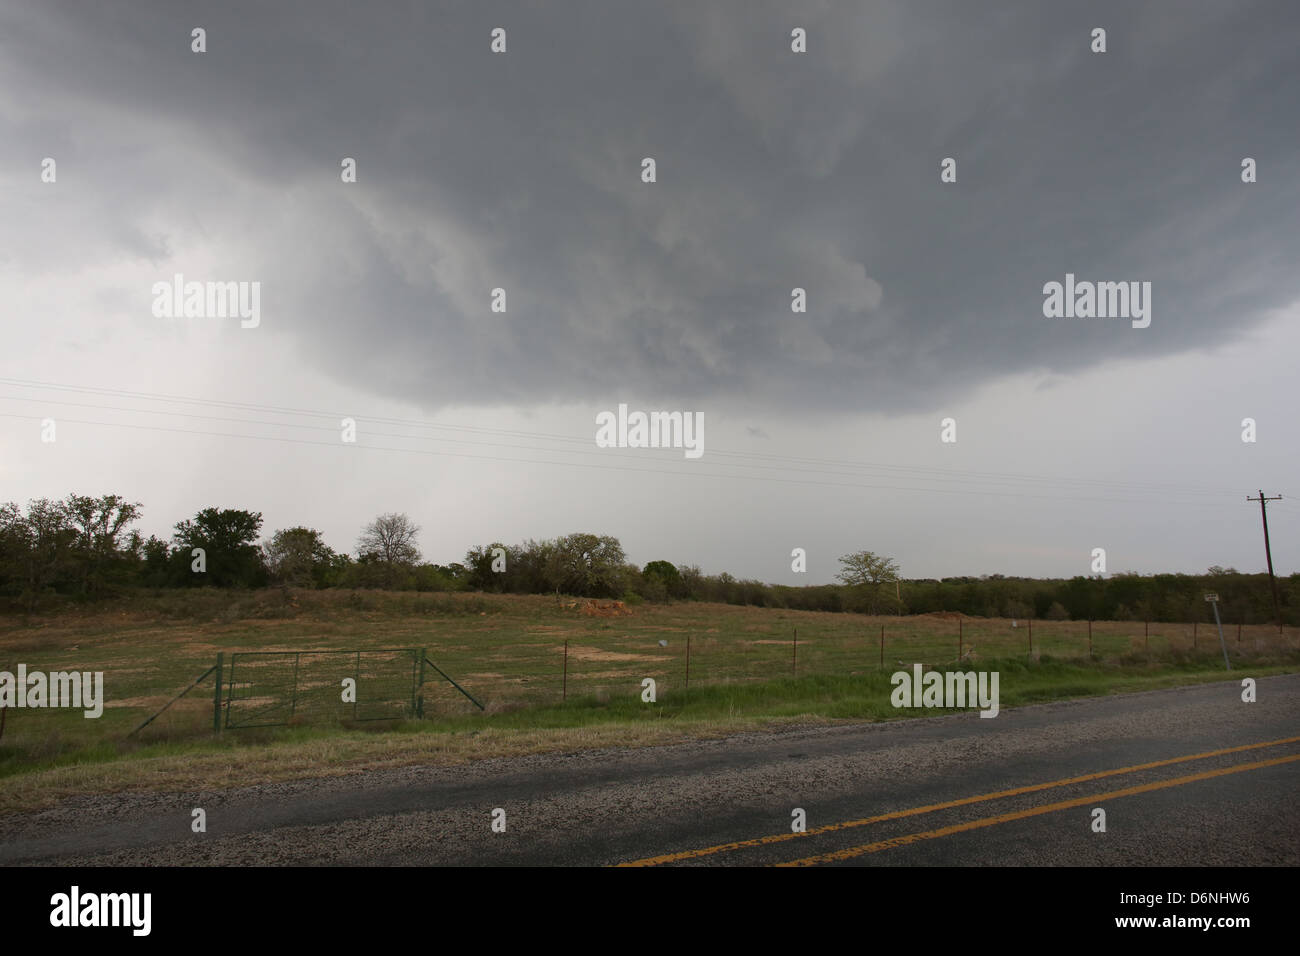 A large storm cloud over a field in the Midwest. Stock Photo